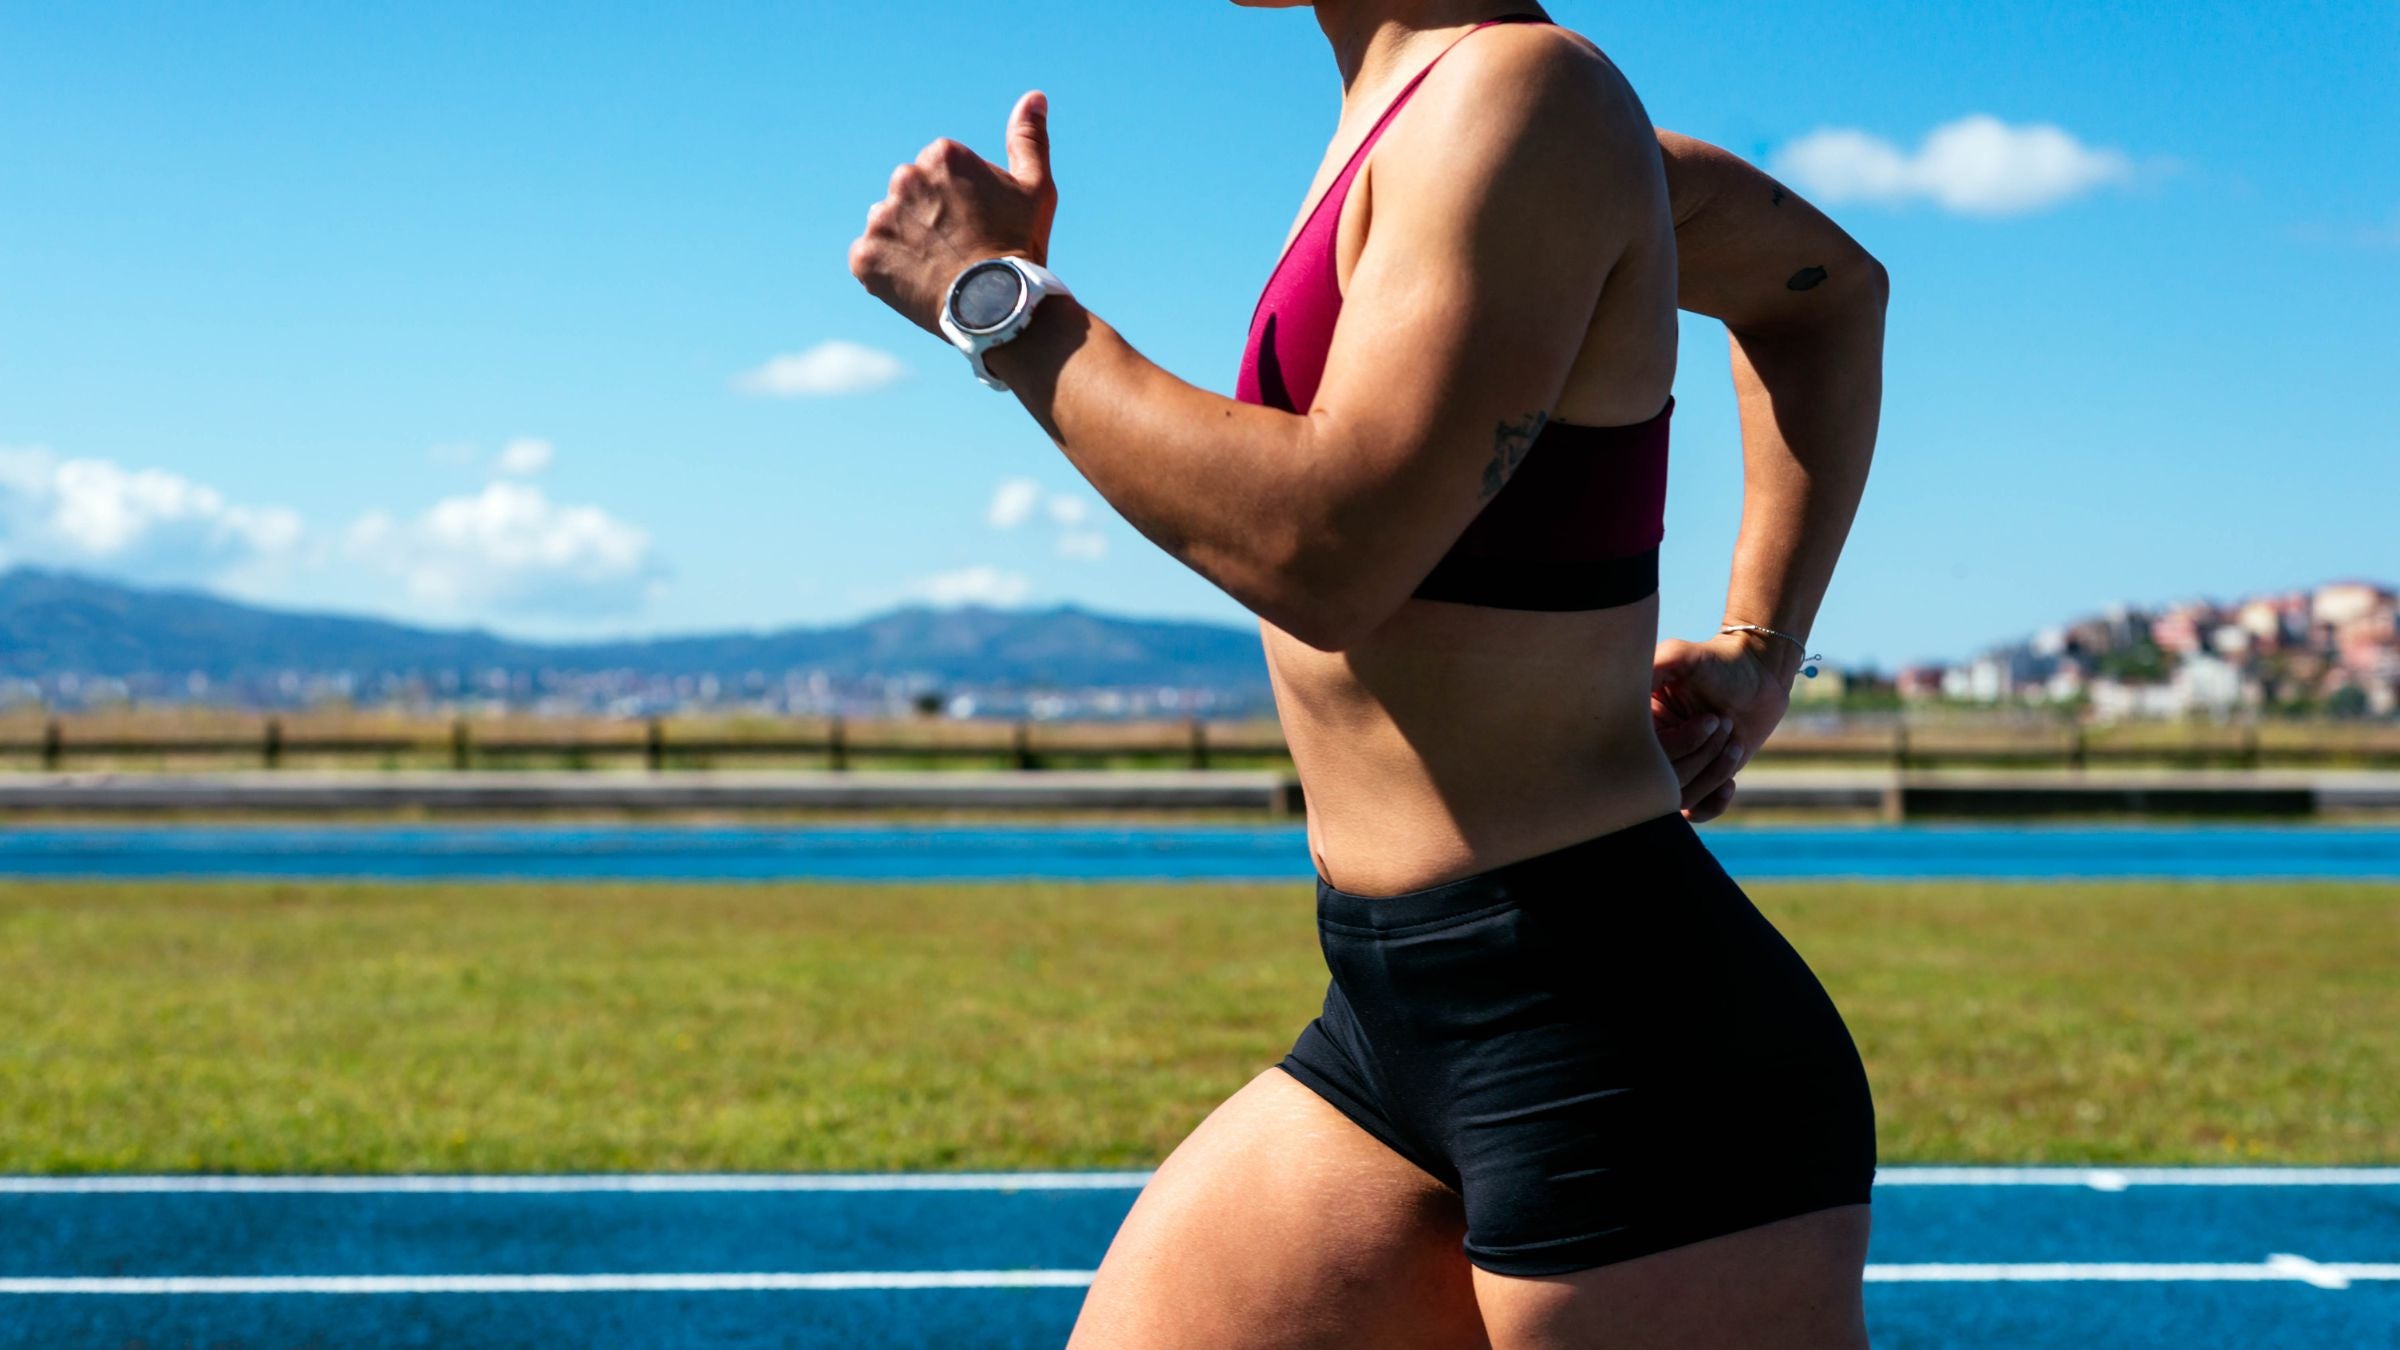 What to Do for Chafing, Irritation and Rash From a Sports Bra